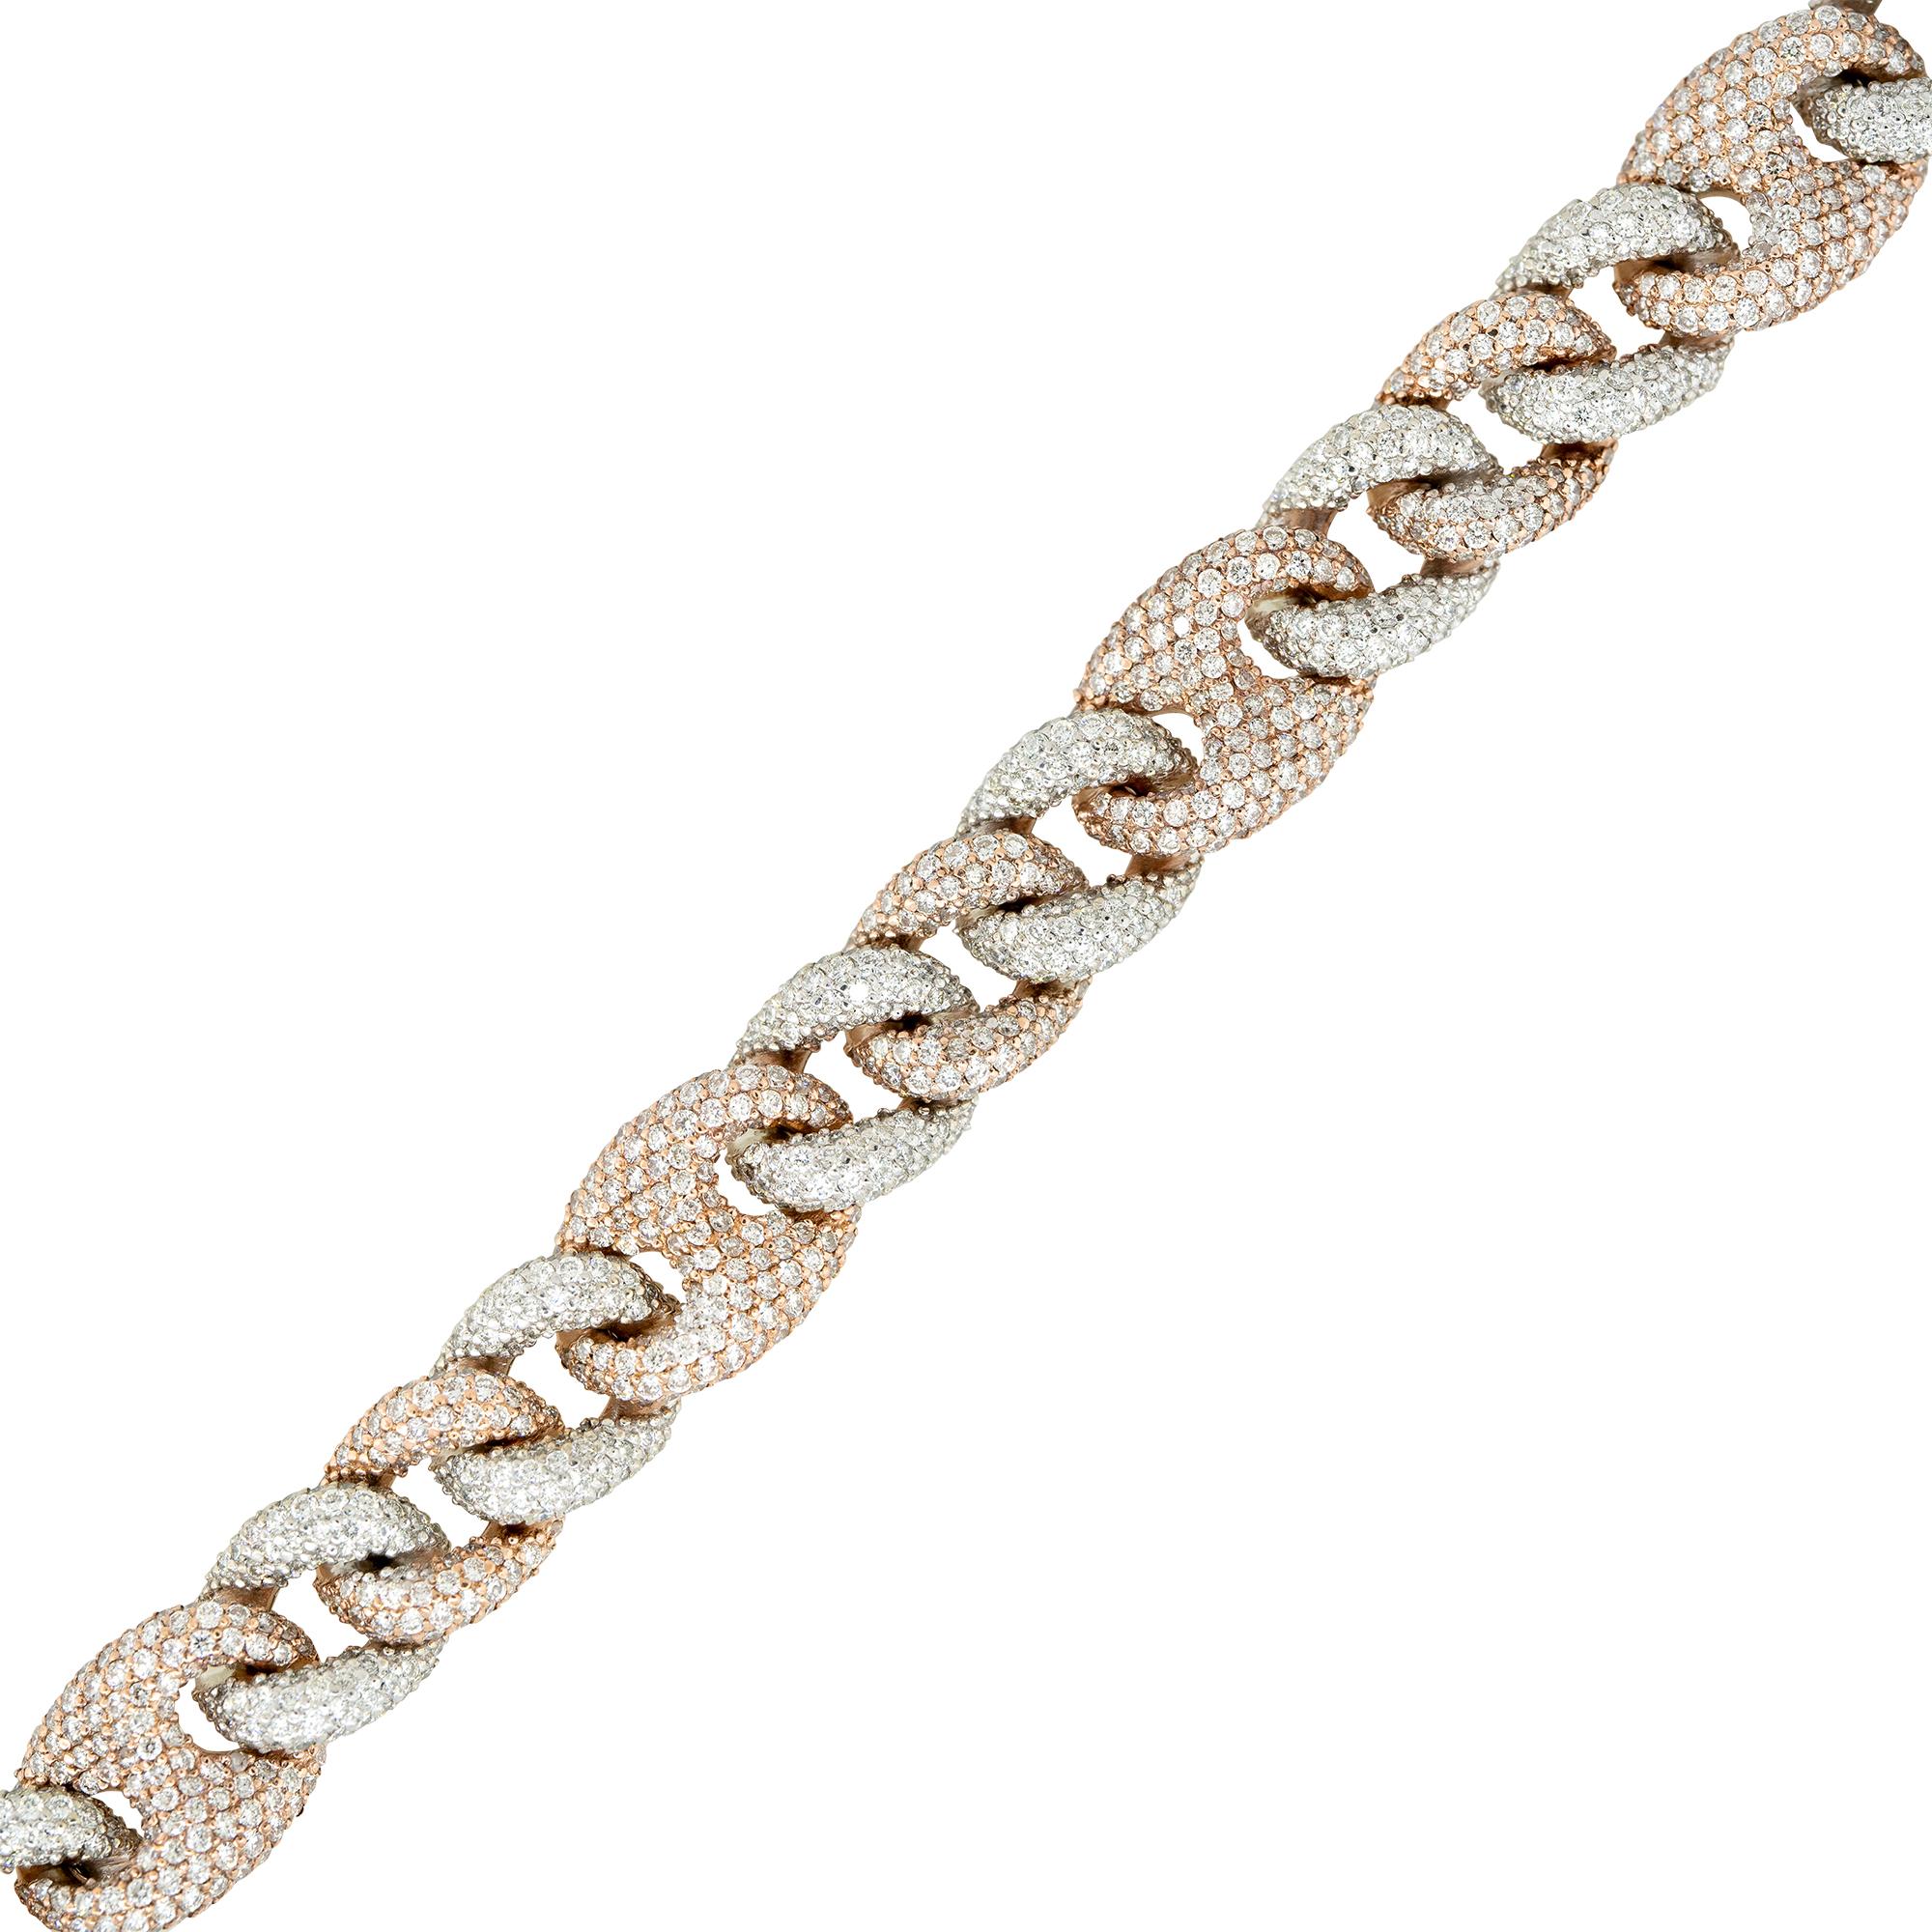 This 12.40 carat pave diamond link bracelet features a classic Cuban link design as well as a Mariner Link chain. The chain has thick, flat, interlocking links that create a bold and substantial look. The bracelet is made of high-quality 14k white